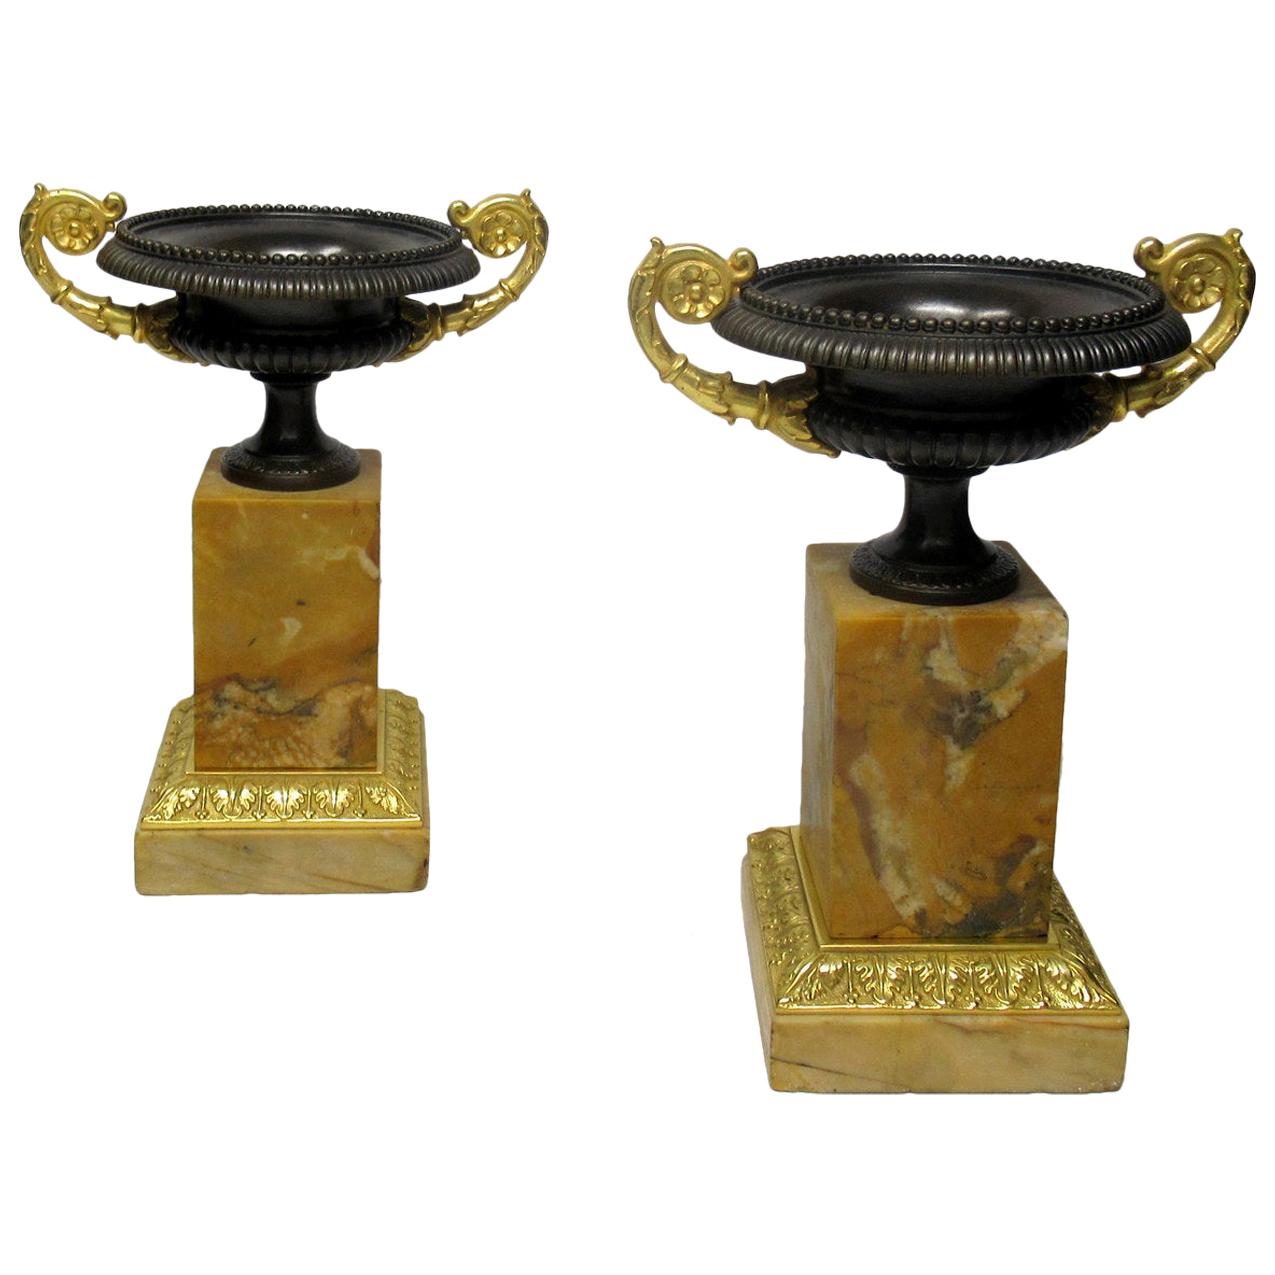 Pair of Grand Tour Ormolu Patinated Bronze Sienna Marble Tazza Urns 19th Cetury